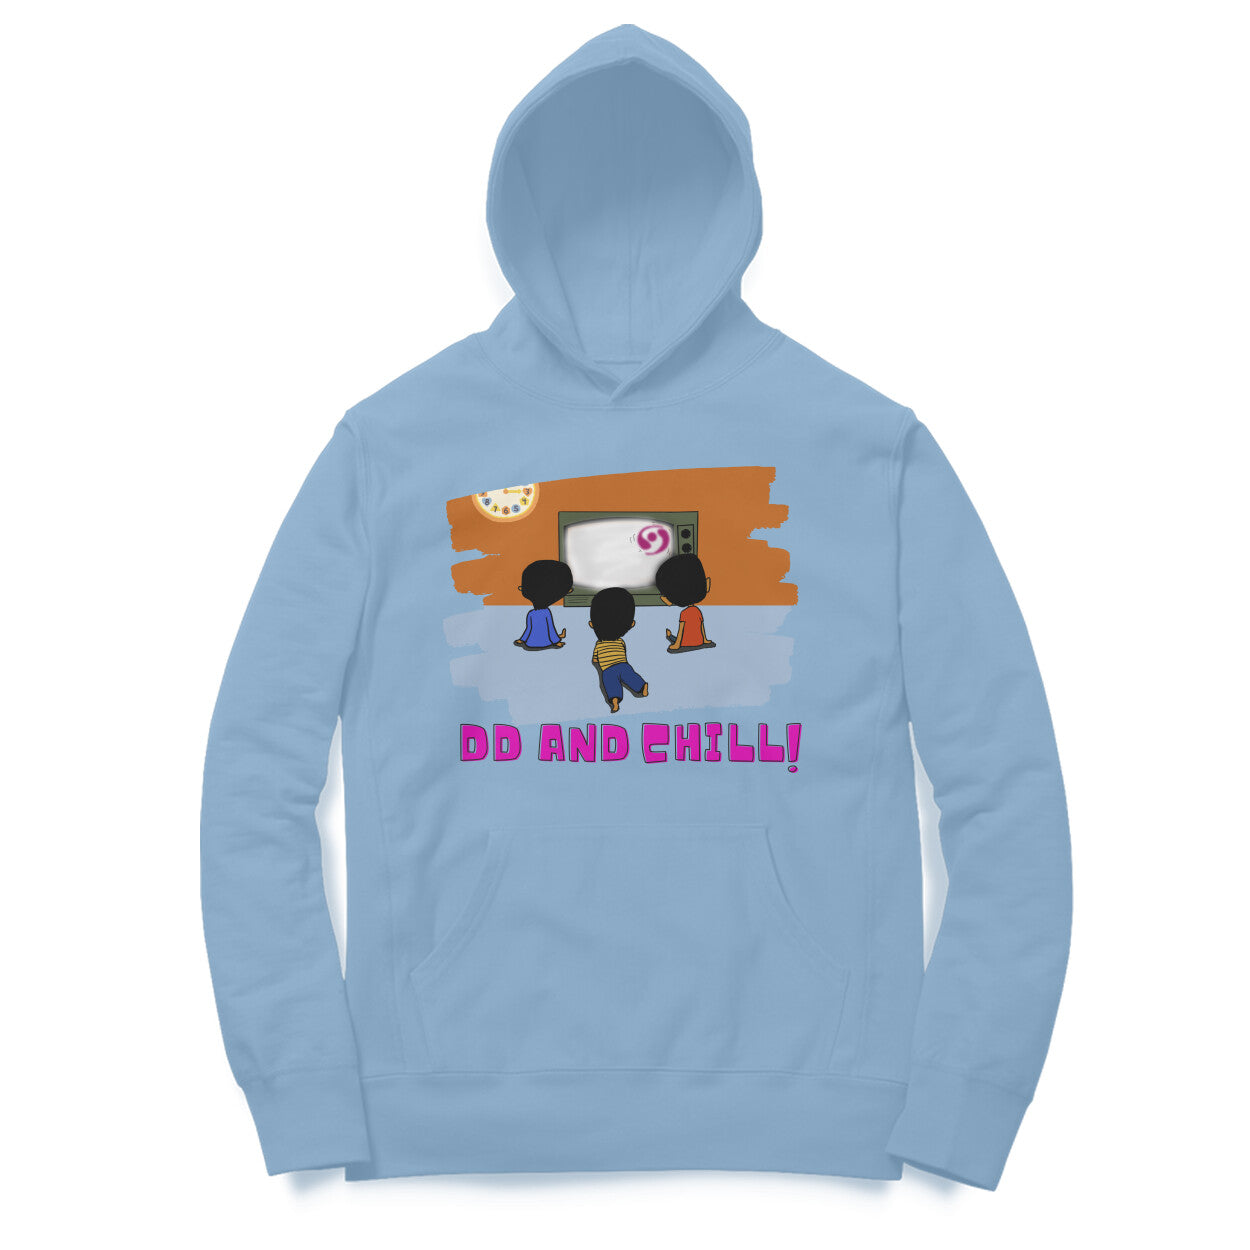 Bilkool DD and Chill With Friends Cotton Hoodies